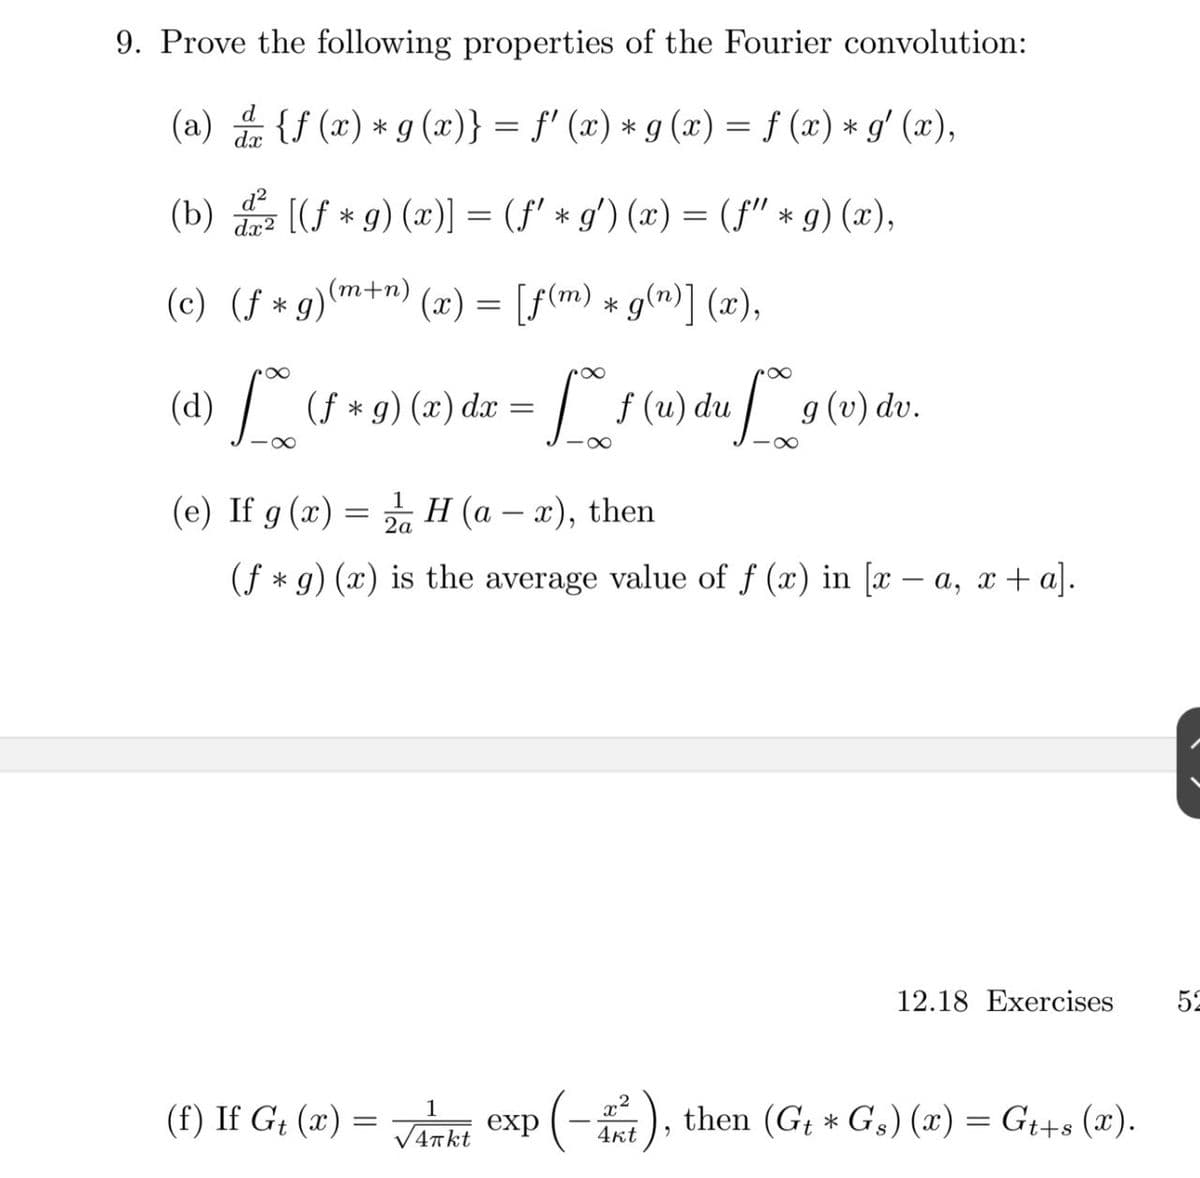 9. Prove the following properties of the Fourier convolution:
(a) {f (x) *g (x)} = f' (x) * g (x) = f (x) * g' (x),
d
%3|
(b) [(f * 9) (x)] = (f' * g') (x) = (f" * g) (x),
d?
dx2
(c) (f * g)m+n) (x) = [f(m) * g(n)] (x),
(d) (s *9) (2) da = s (u) du g (v) dv.
(4) /
(e) If g (x) = H (a – x), then
2a
(f * g) (x) is the average value of f (x) in [x - a, x + a].
12.18 Exercises
52
(-), then (G; * G,) (x) = G++s (x).
1
(f) If G; (x) =
V4Tkt
4kt
